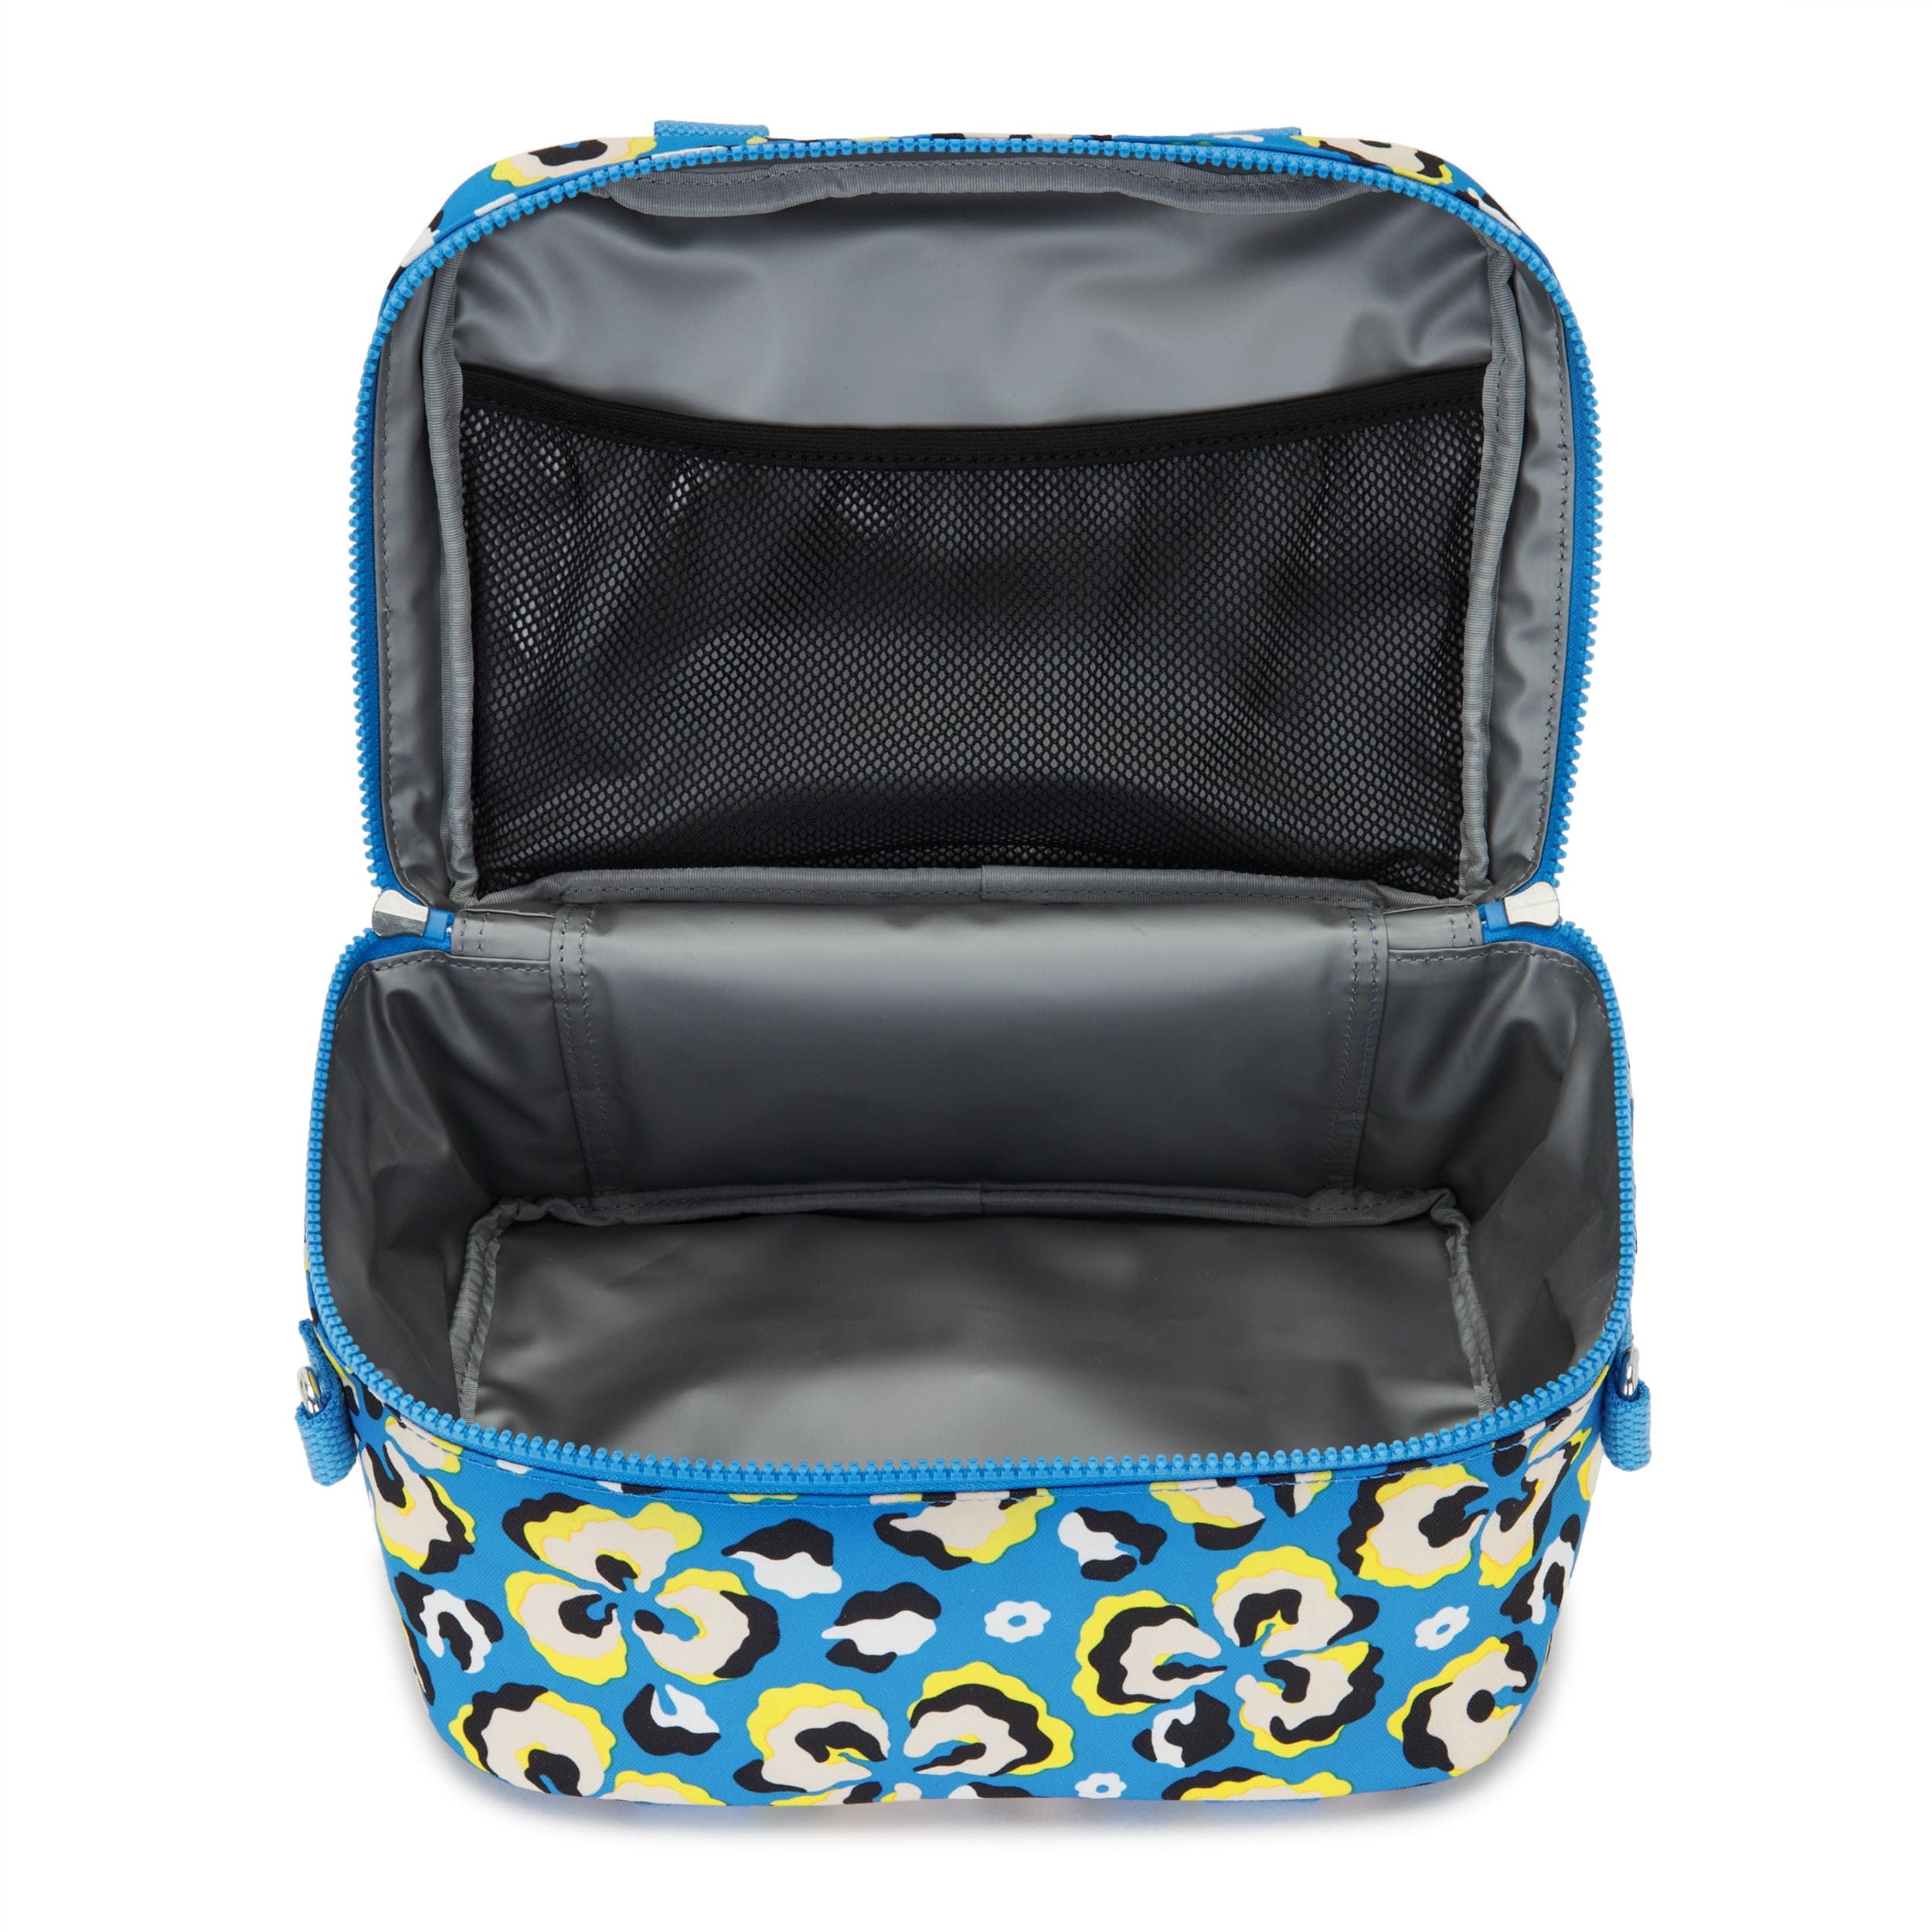 Kipling-Miyo-Large Lunchbox (With Trolley Sleeve)-Leopard Floral-I2989-P2A